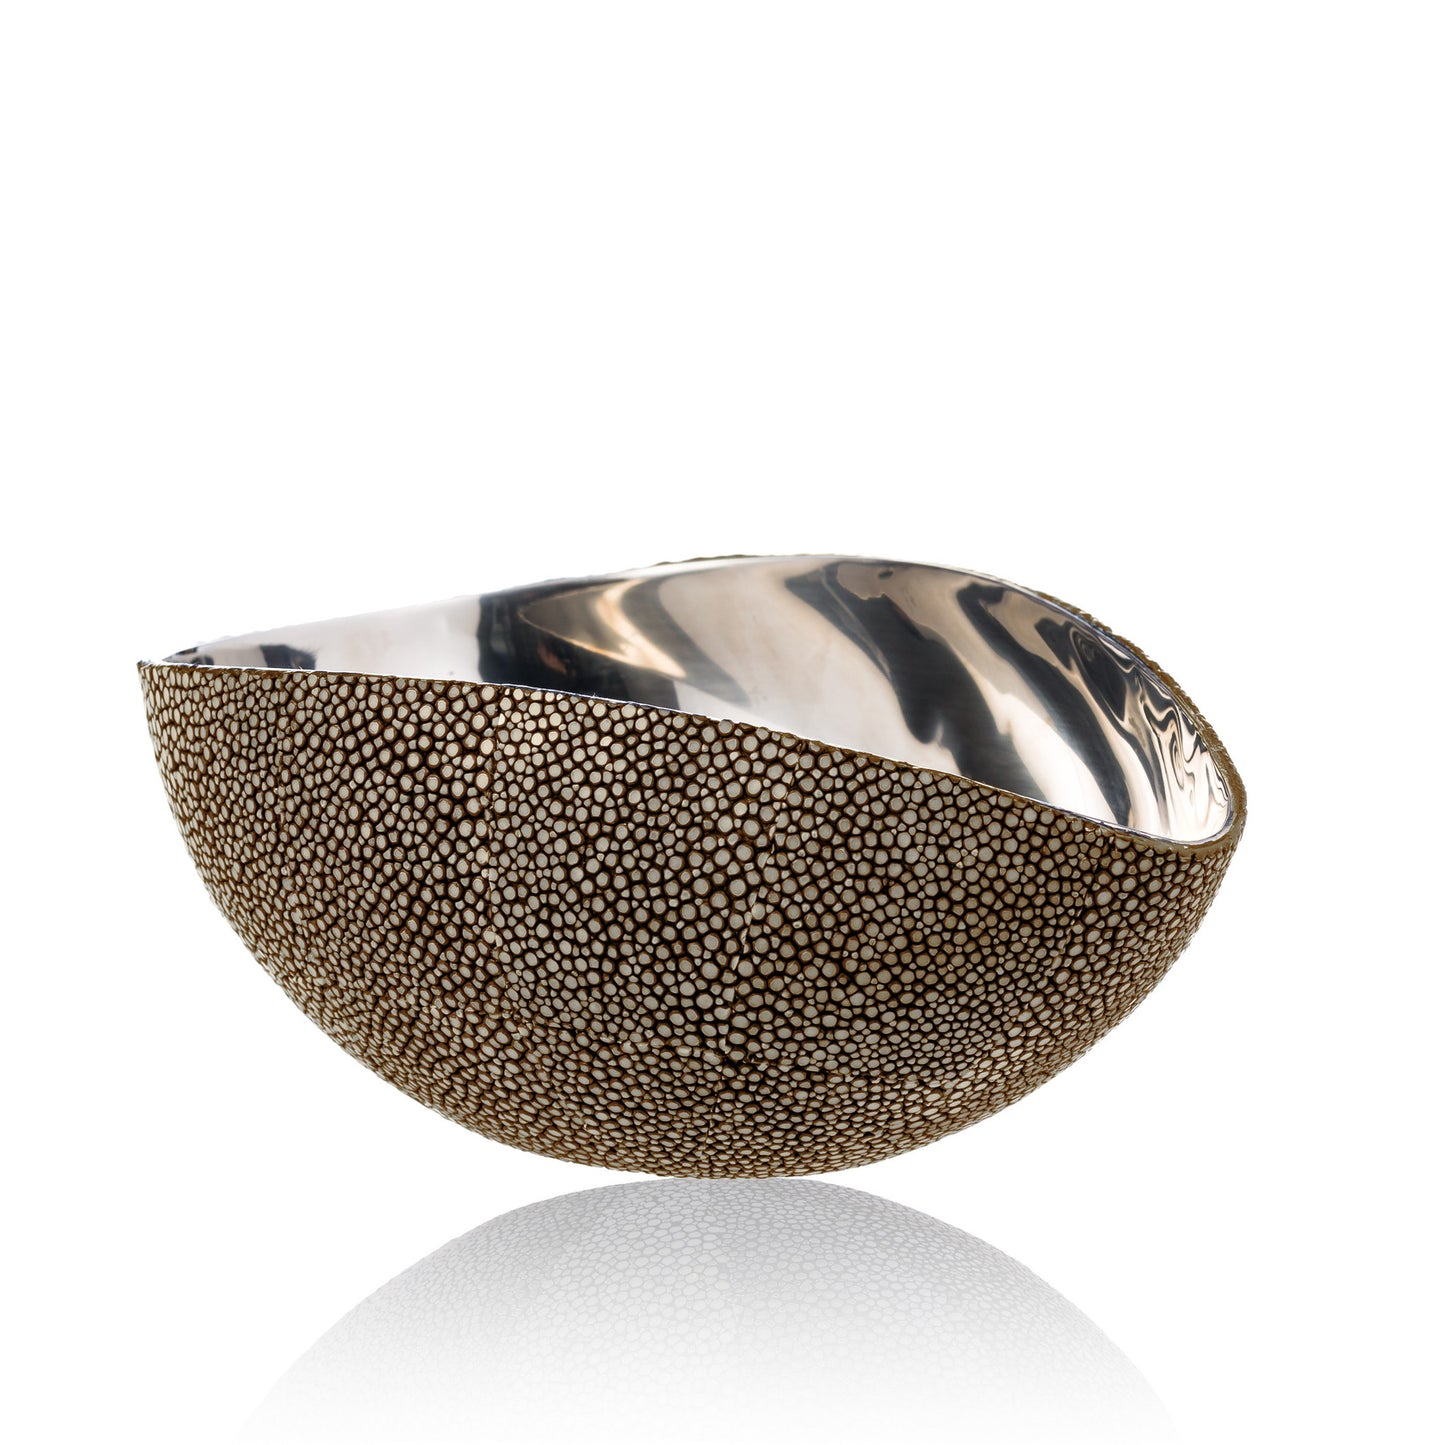 Stainless Steel Bowl in Brown Stingray Leather